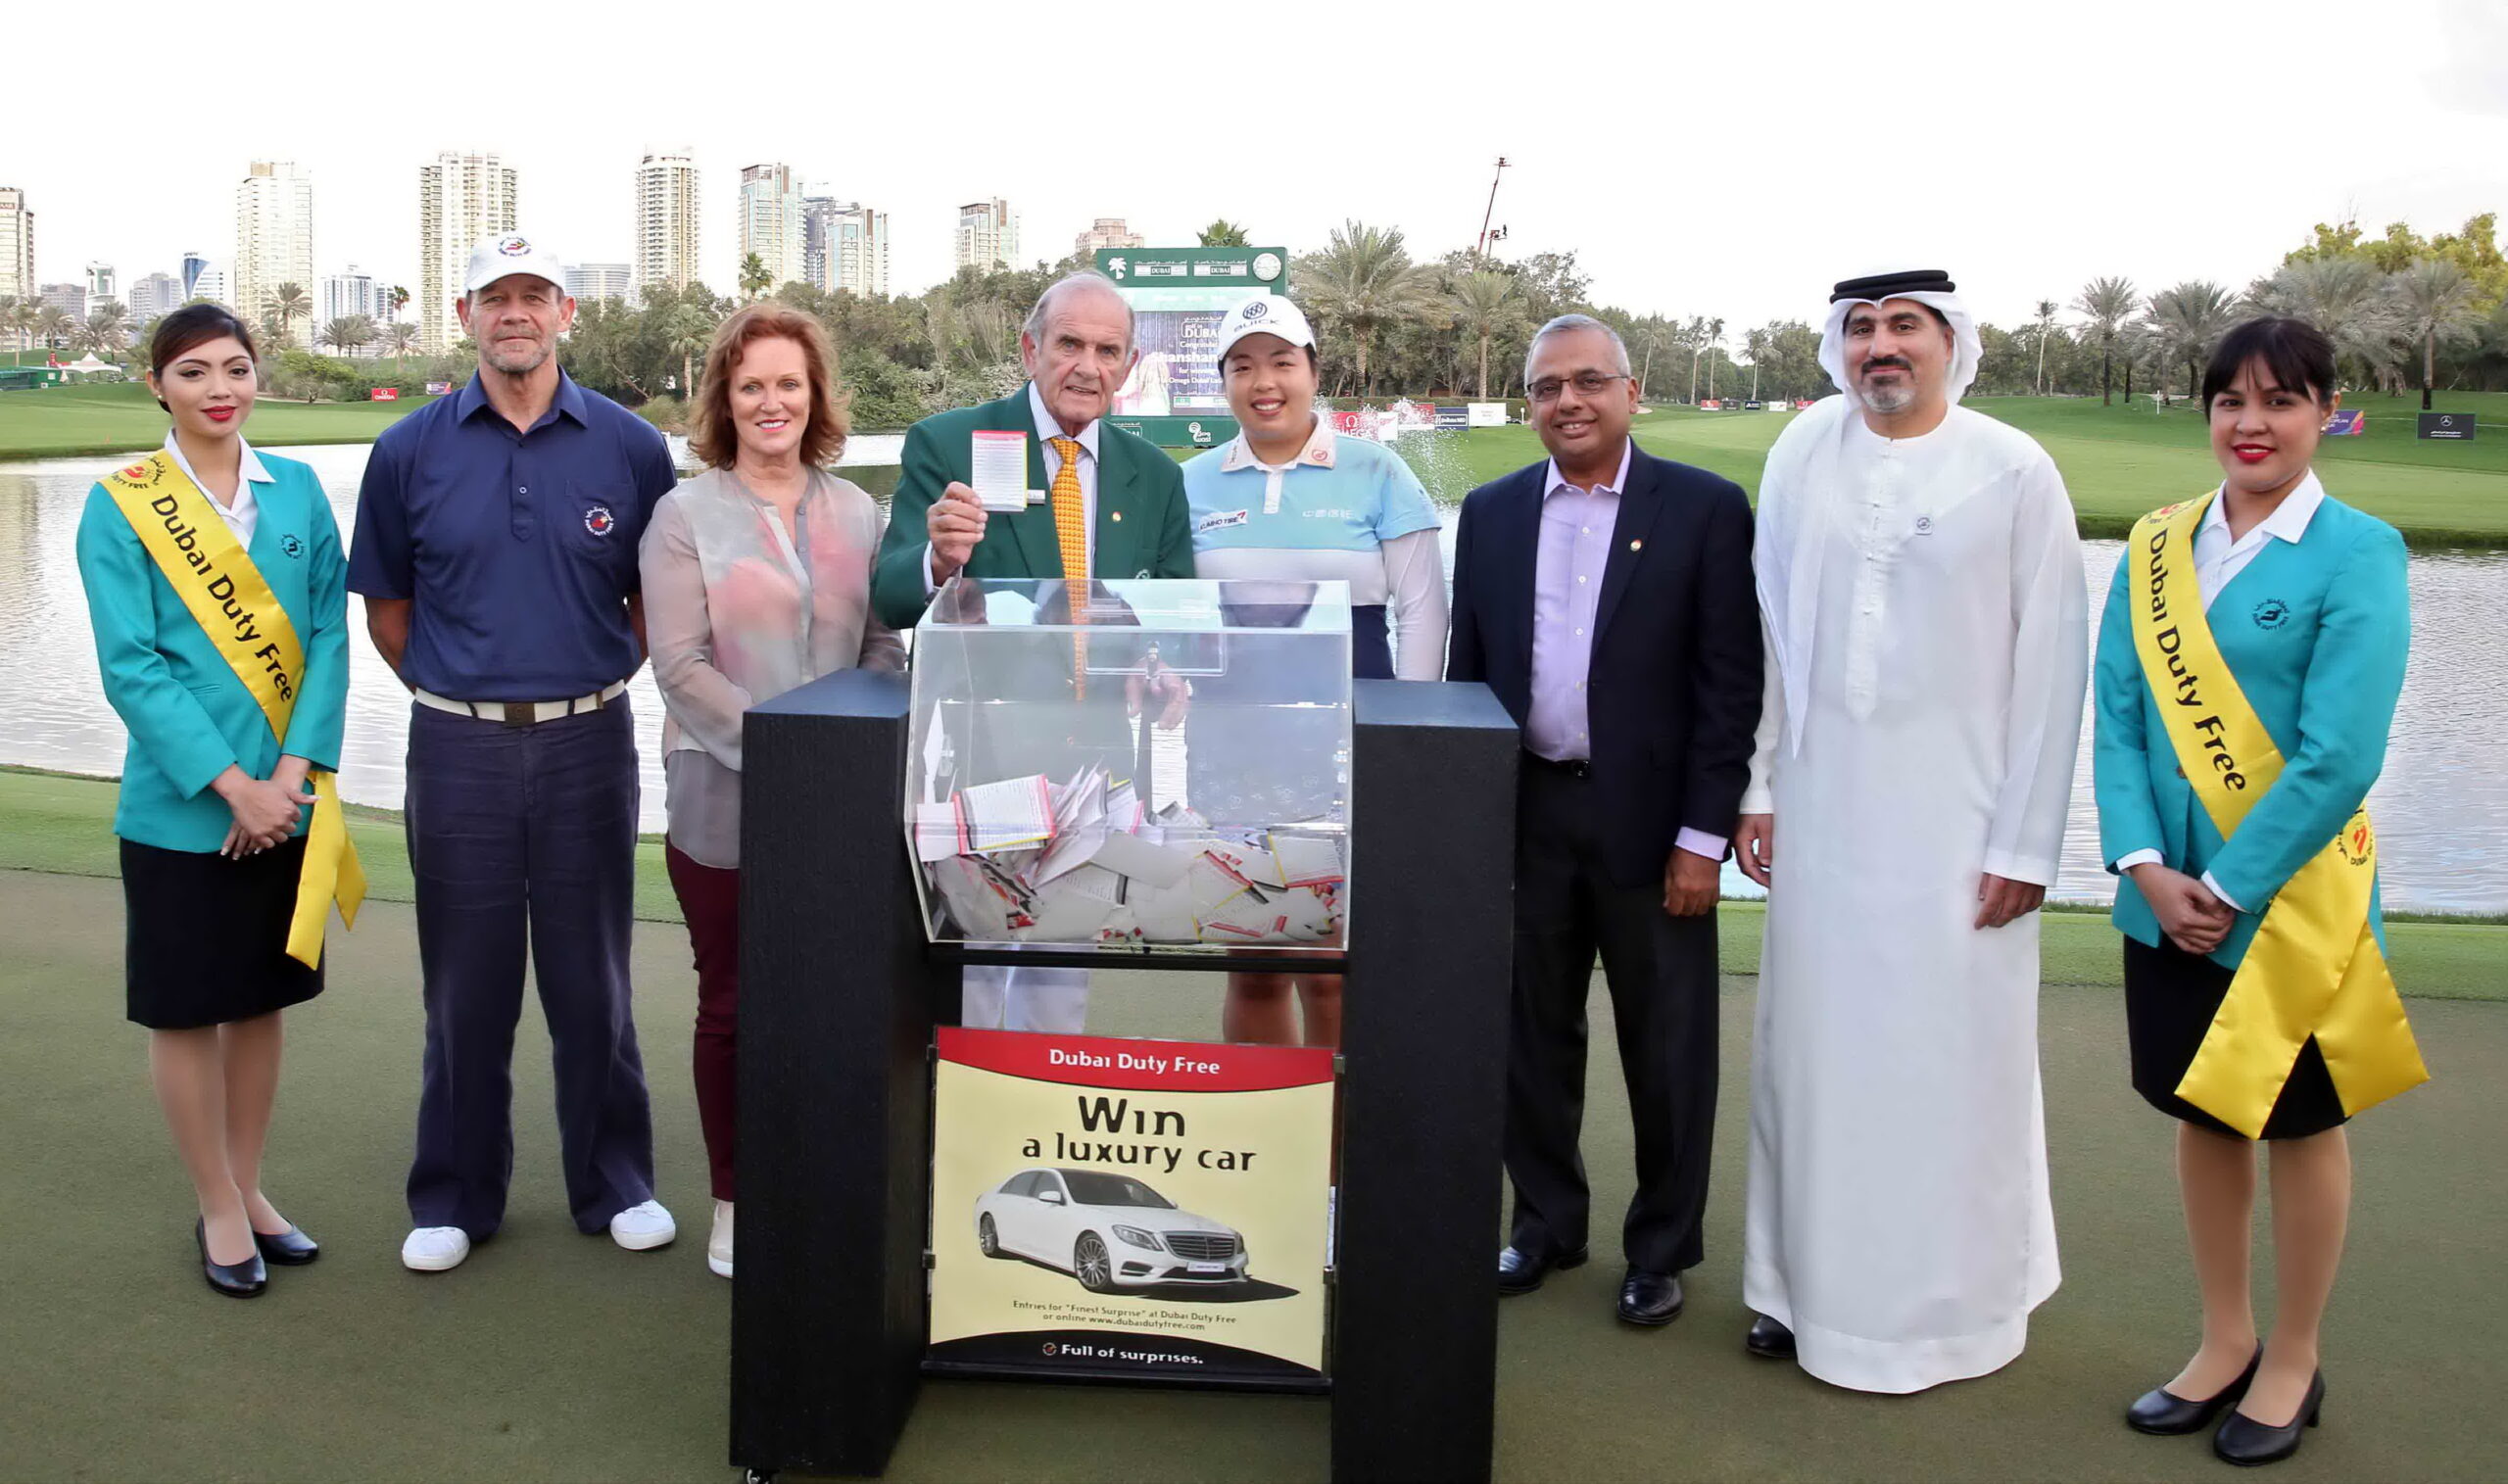 dubai-duty-free-senior-executives-with-the-omega-dubai-ladies-masters-winner-shanshan-feng-conducted-the-finest-surprise-draw